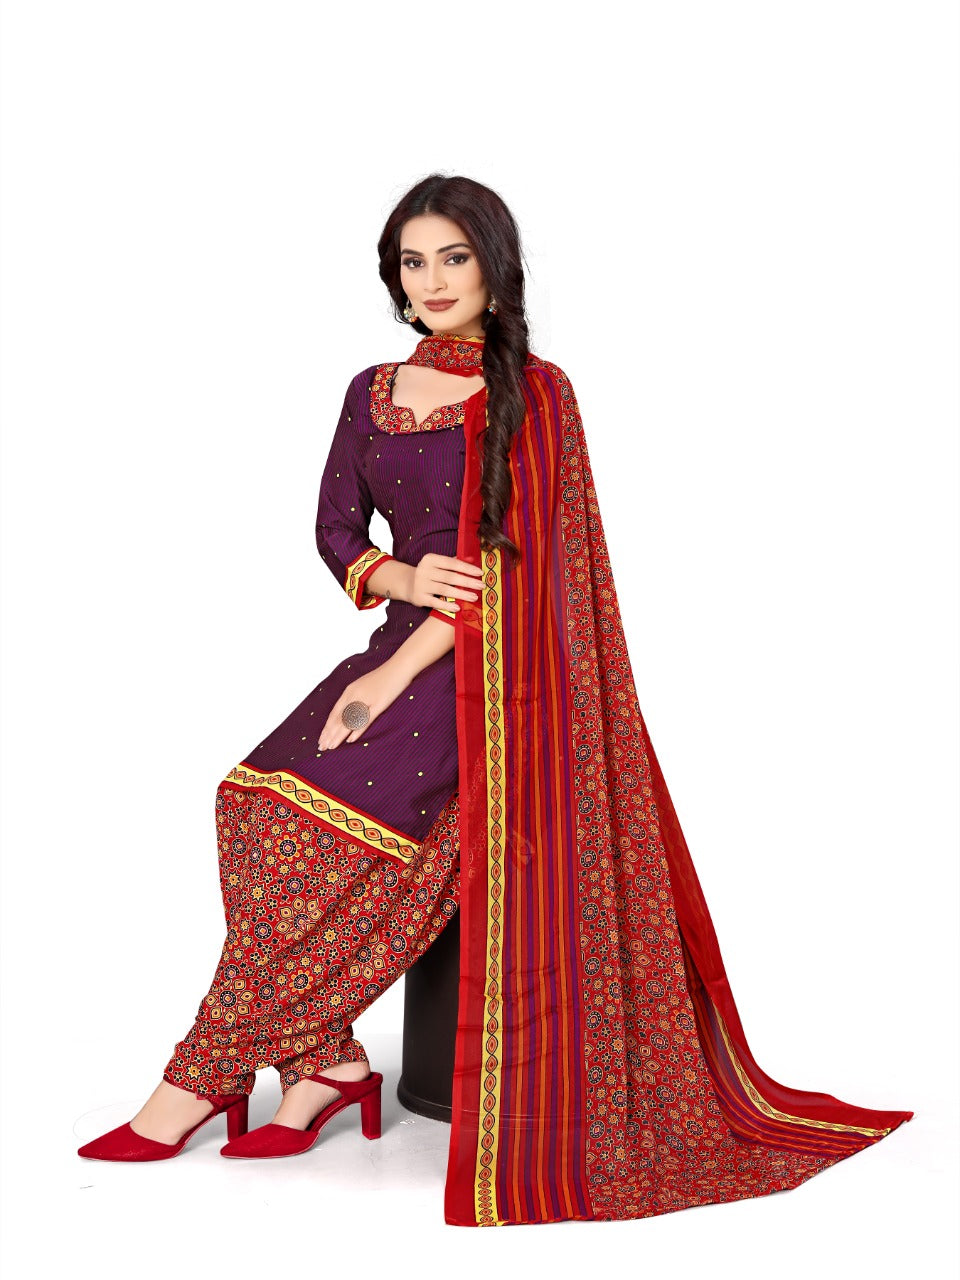 Shrigul - Coffee Anarkali Rayon Women's Stitched Salwar Suit ( Pack of 1 )  Price in India - Buy Shrigul - Coffee Anarkali Rayon Women's Stitched Salwar  Suit ( Pack of 1 ) Online at Snapdeal